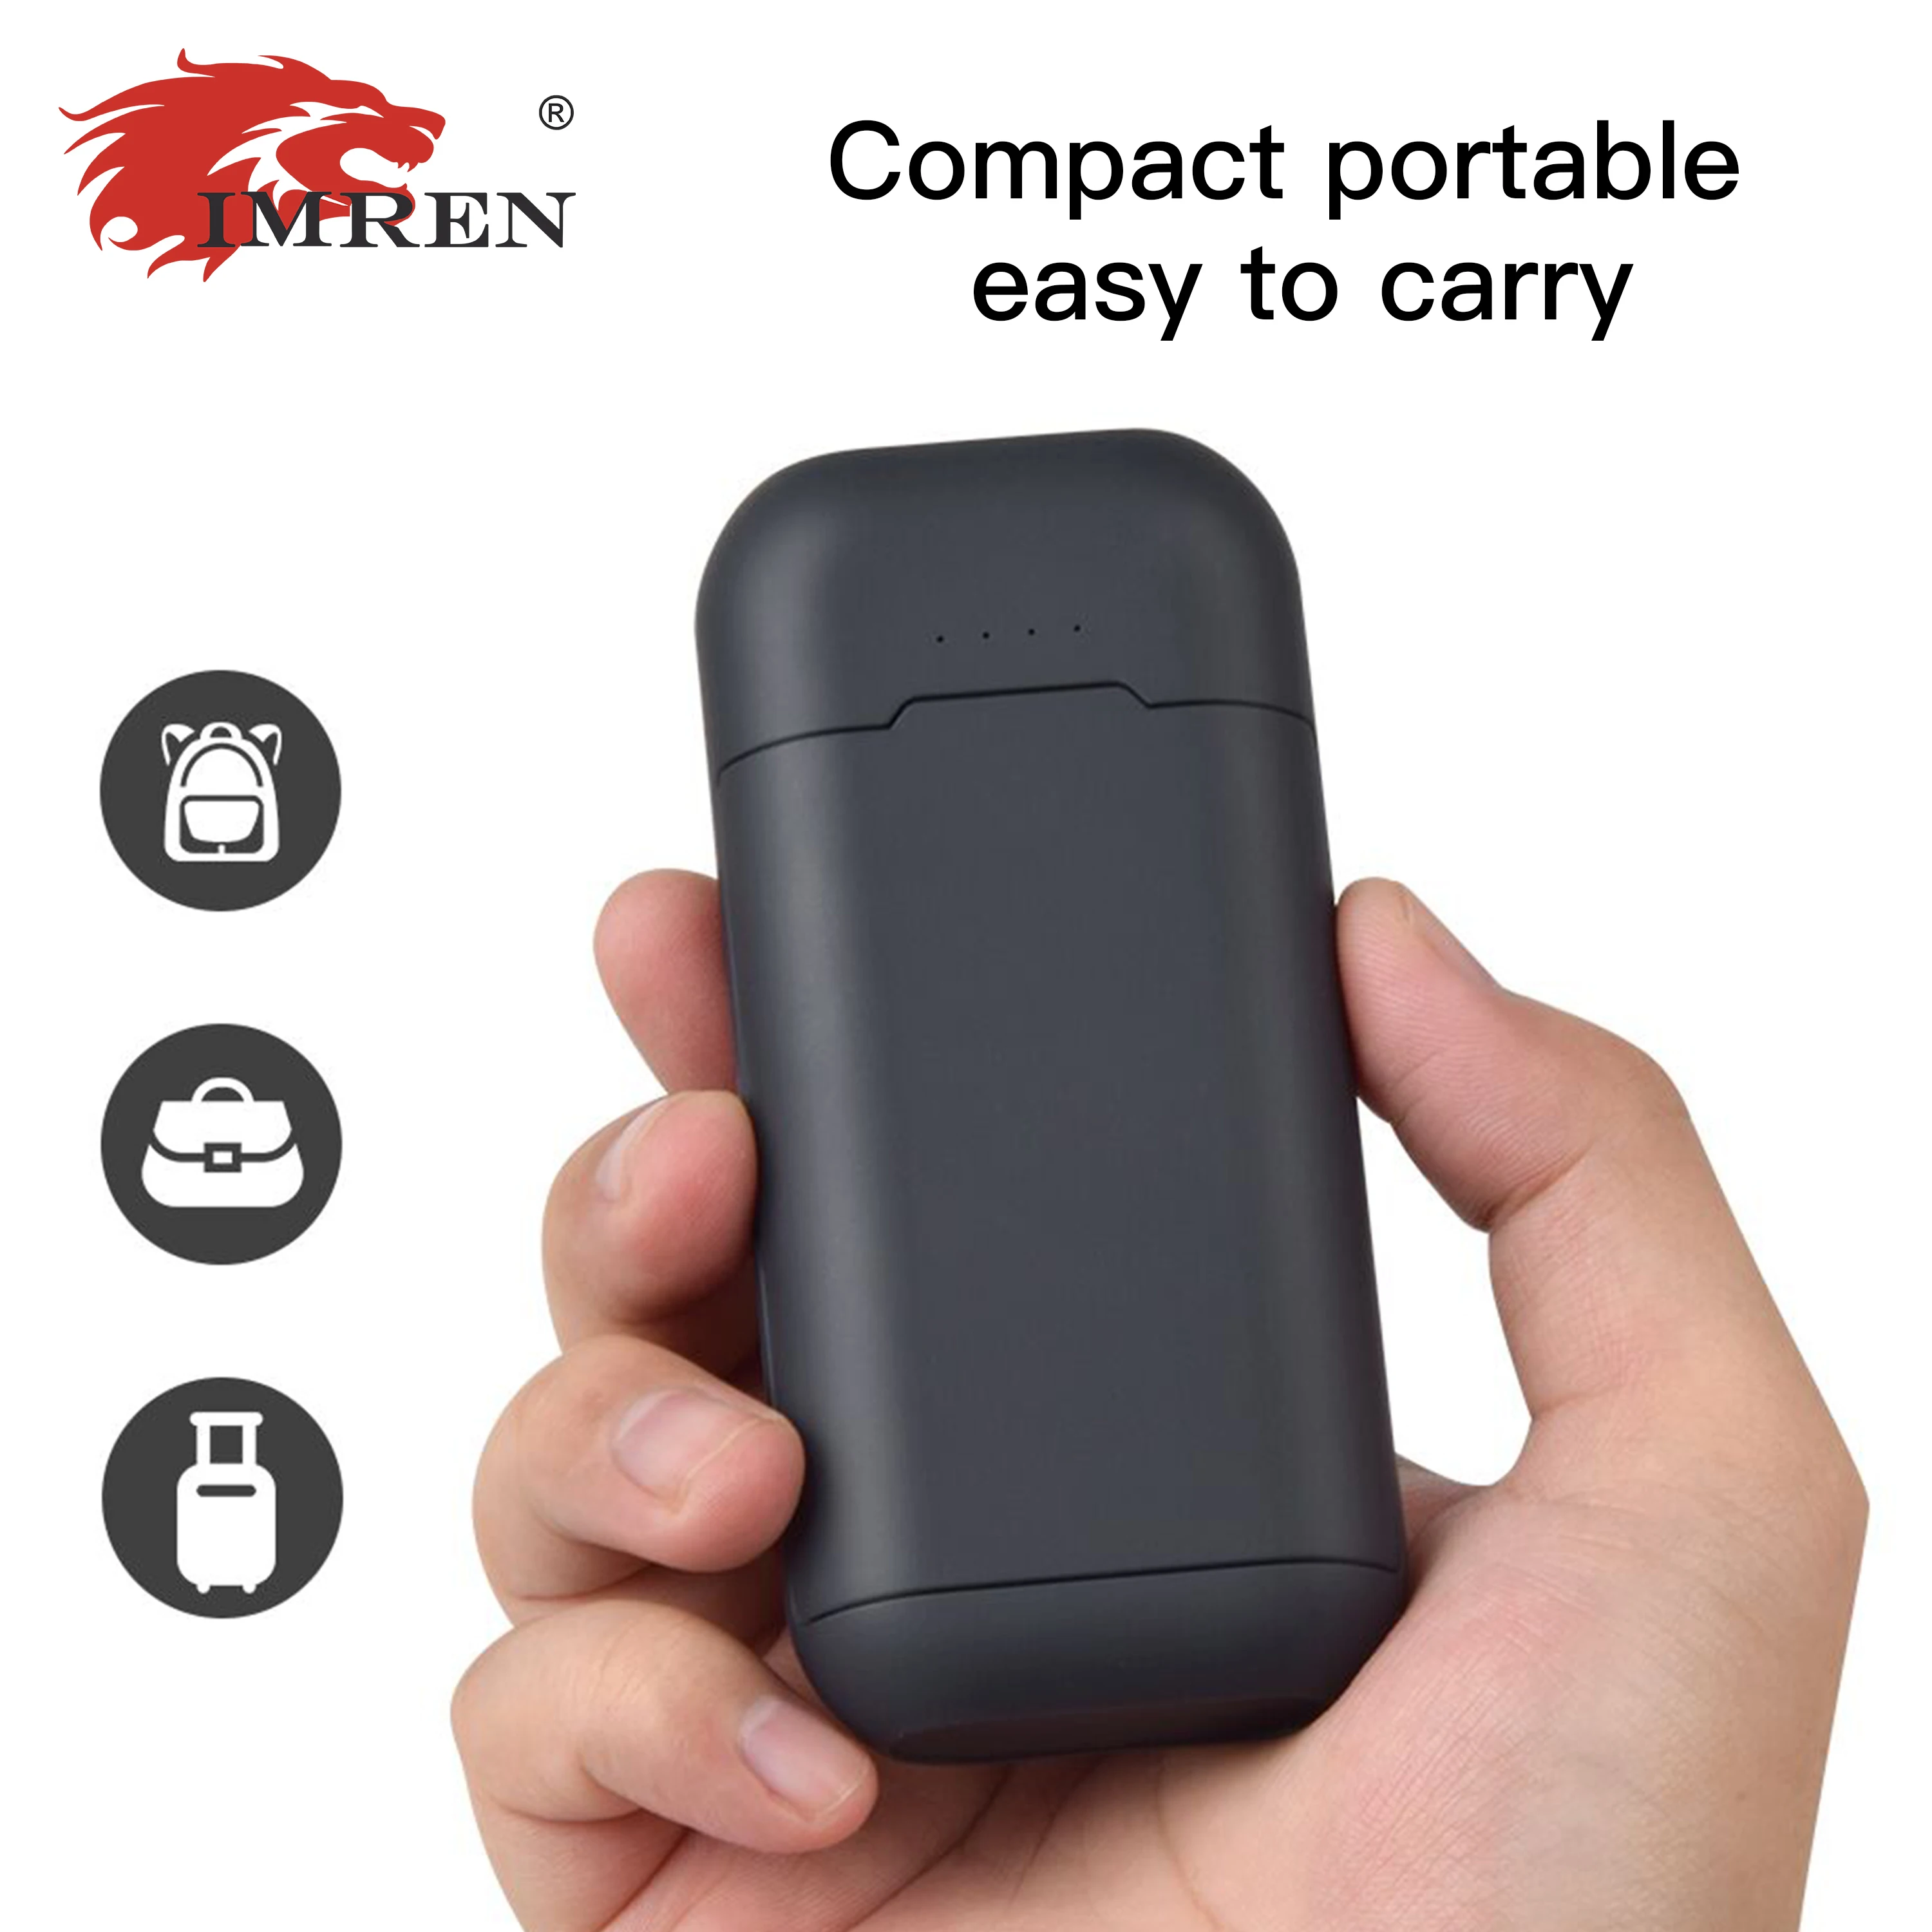 imren multiple safety protection handheld portable battery charger micro usb output 5v 2a power bank removal batteryno battery free global shipping